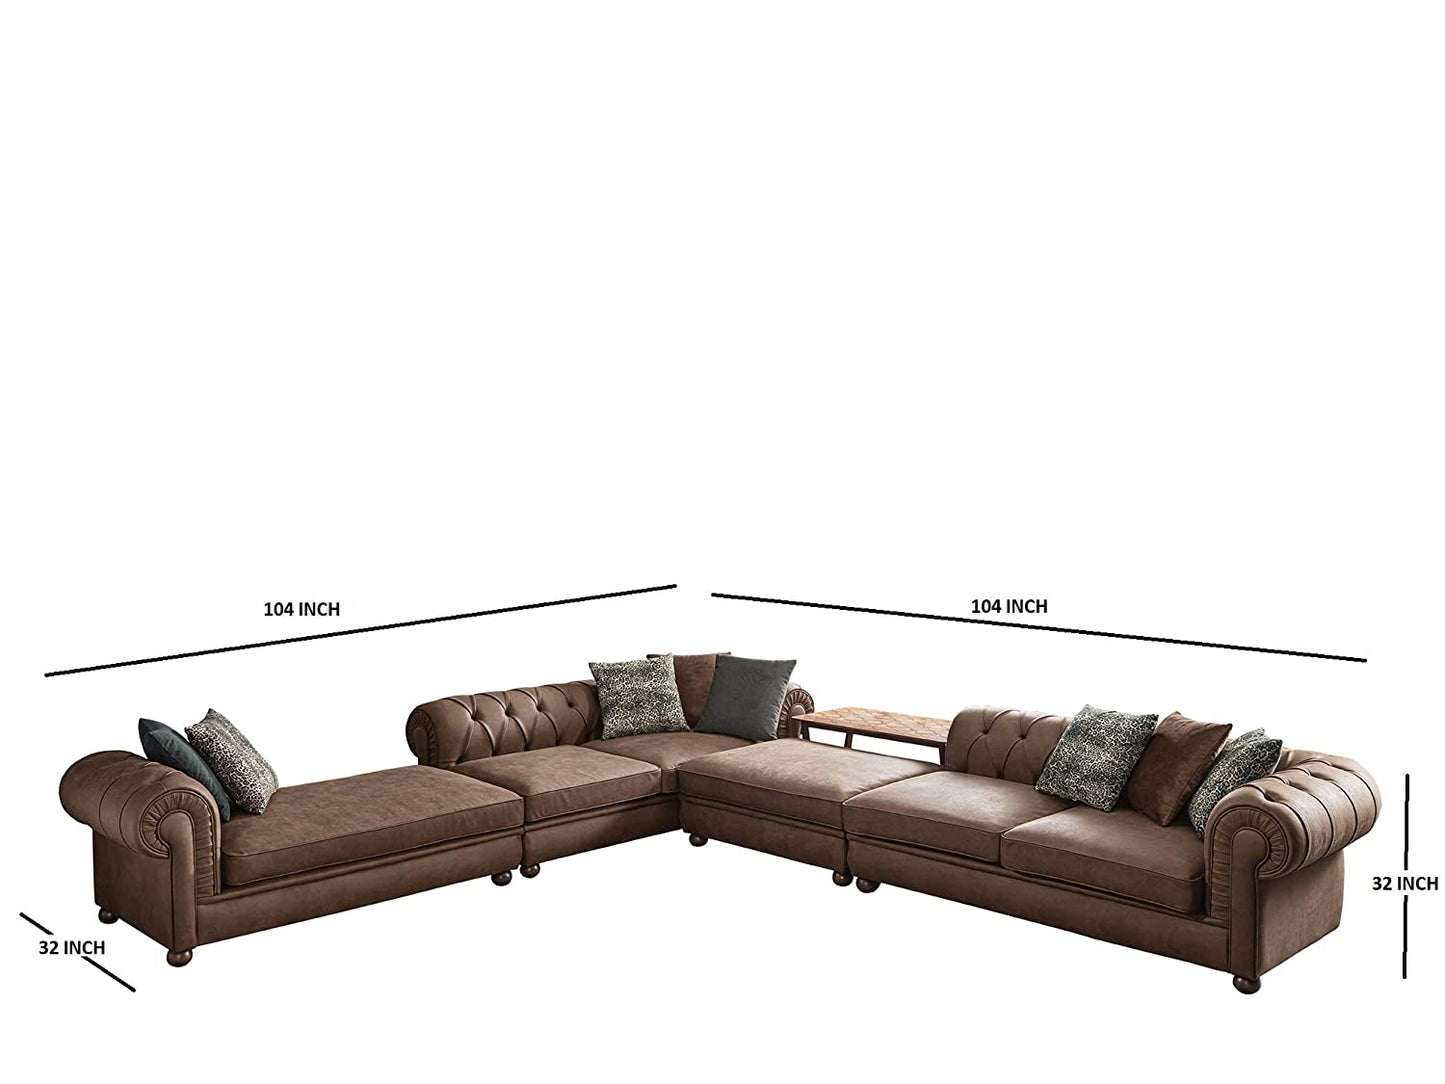 Designer Sofa Set:- Lovesac L Shape Suede Fabric 7 Seater Sofa Set Luxury Furniture with Lounger and Puffy (Brown)